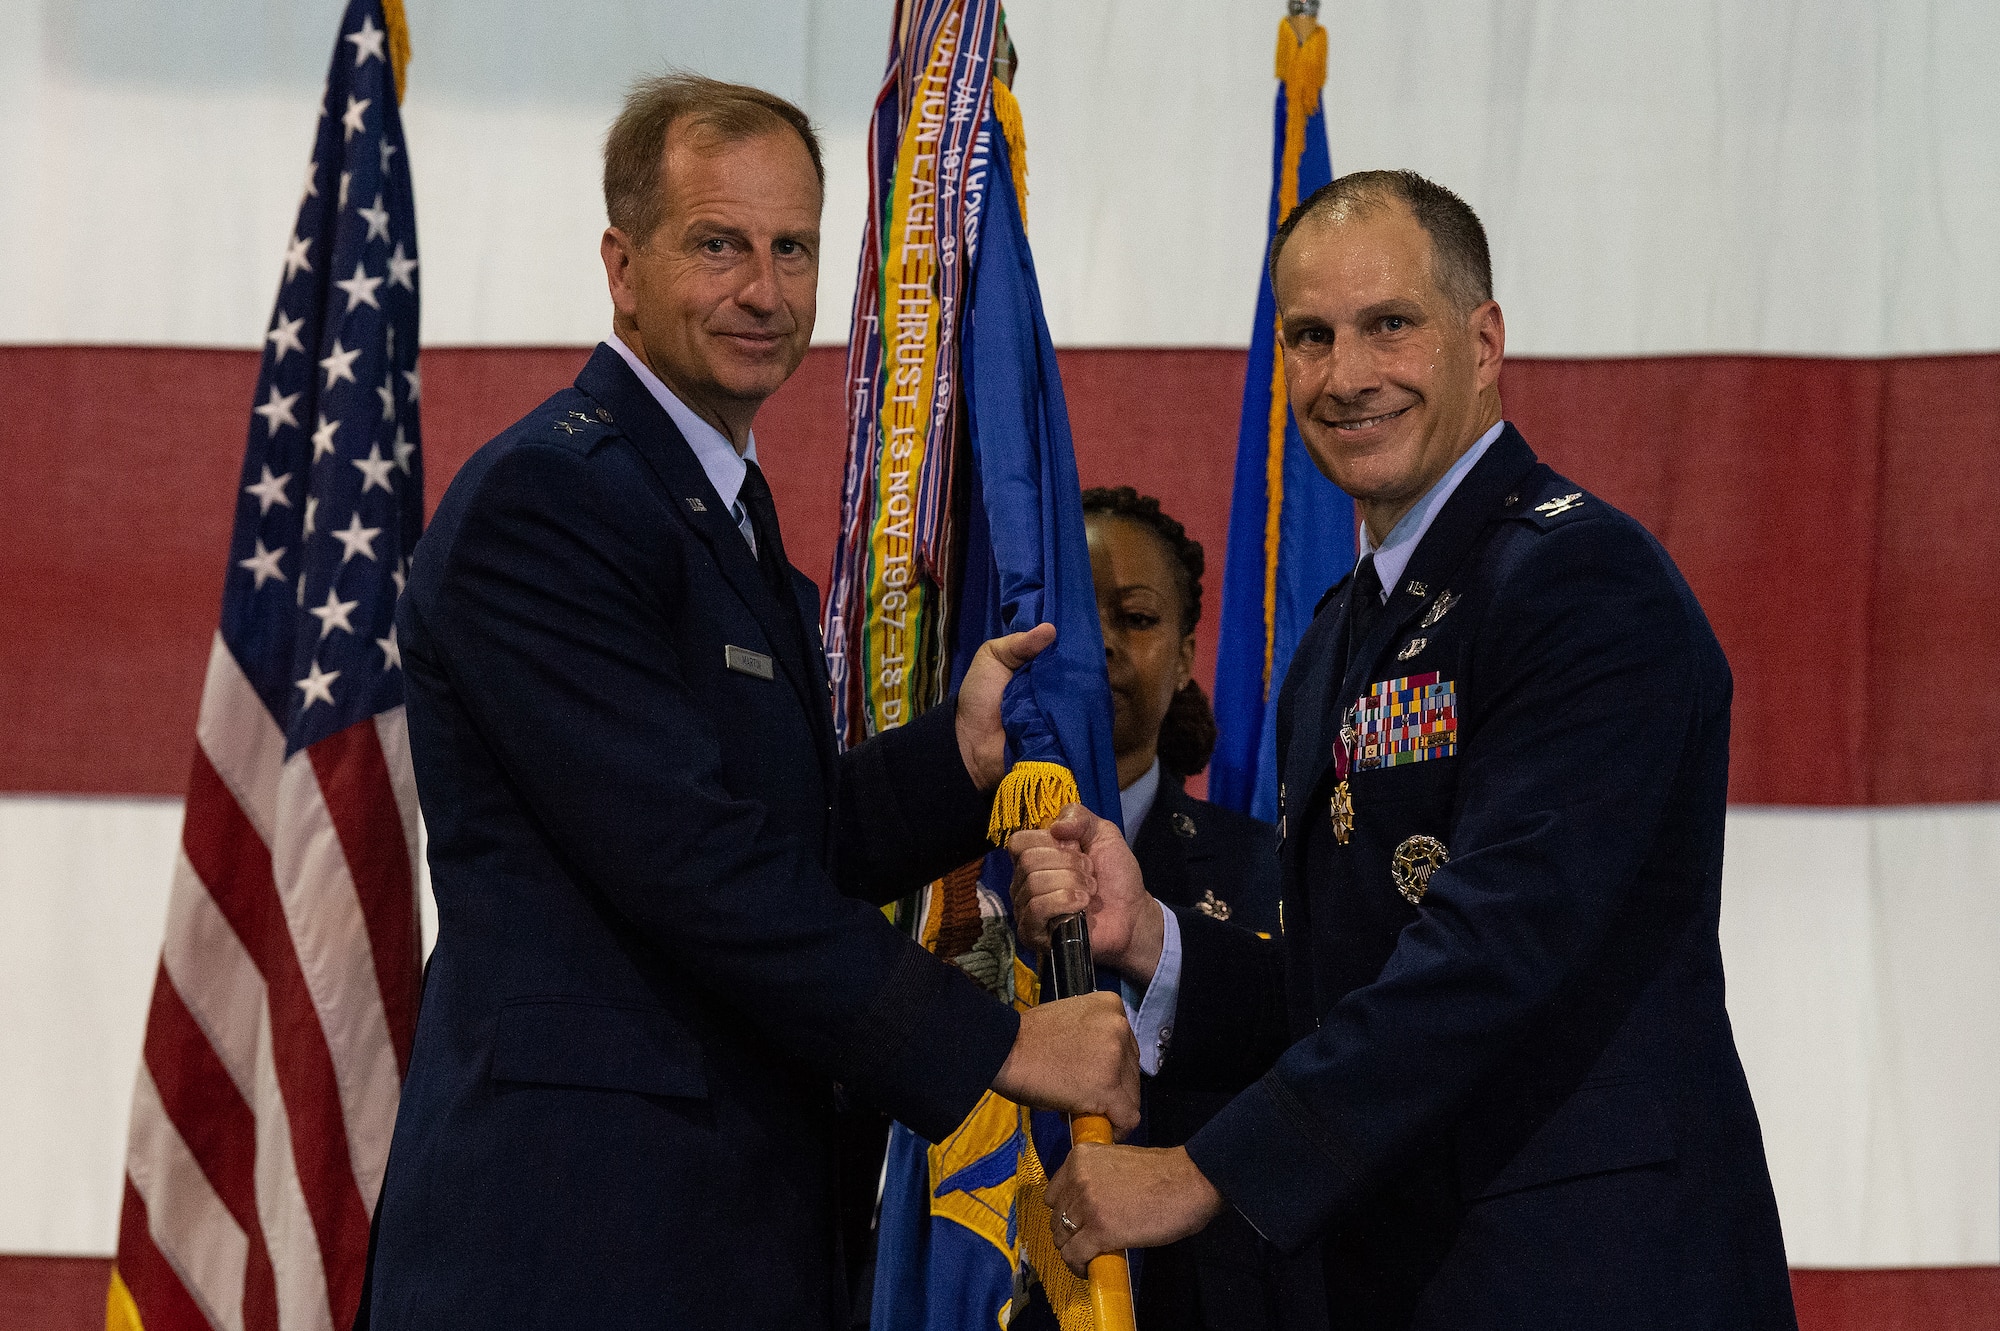 Col. Matthew S. Husemann, right, outgoing 436th Airlift Wing commander, hands the wing’s guidon to Maj. Gen. Corey J. Martin, left, 18th Air Force commander, as he relinquishes command during a Change of Command ceremony at Dover Air Force Base, Delaware, July 7, 2023. Husemann relinquished command to Col. William C. McDonald, who became the wing’s 37th commander. (U.S. Air Force photo by Roland Balik)